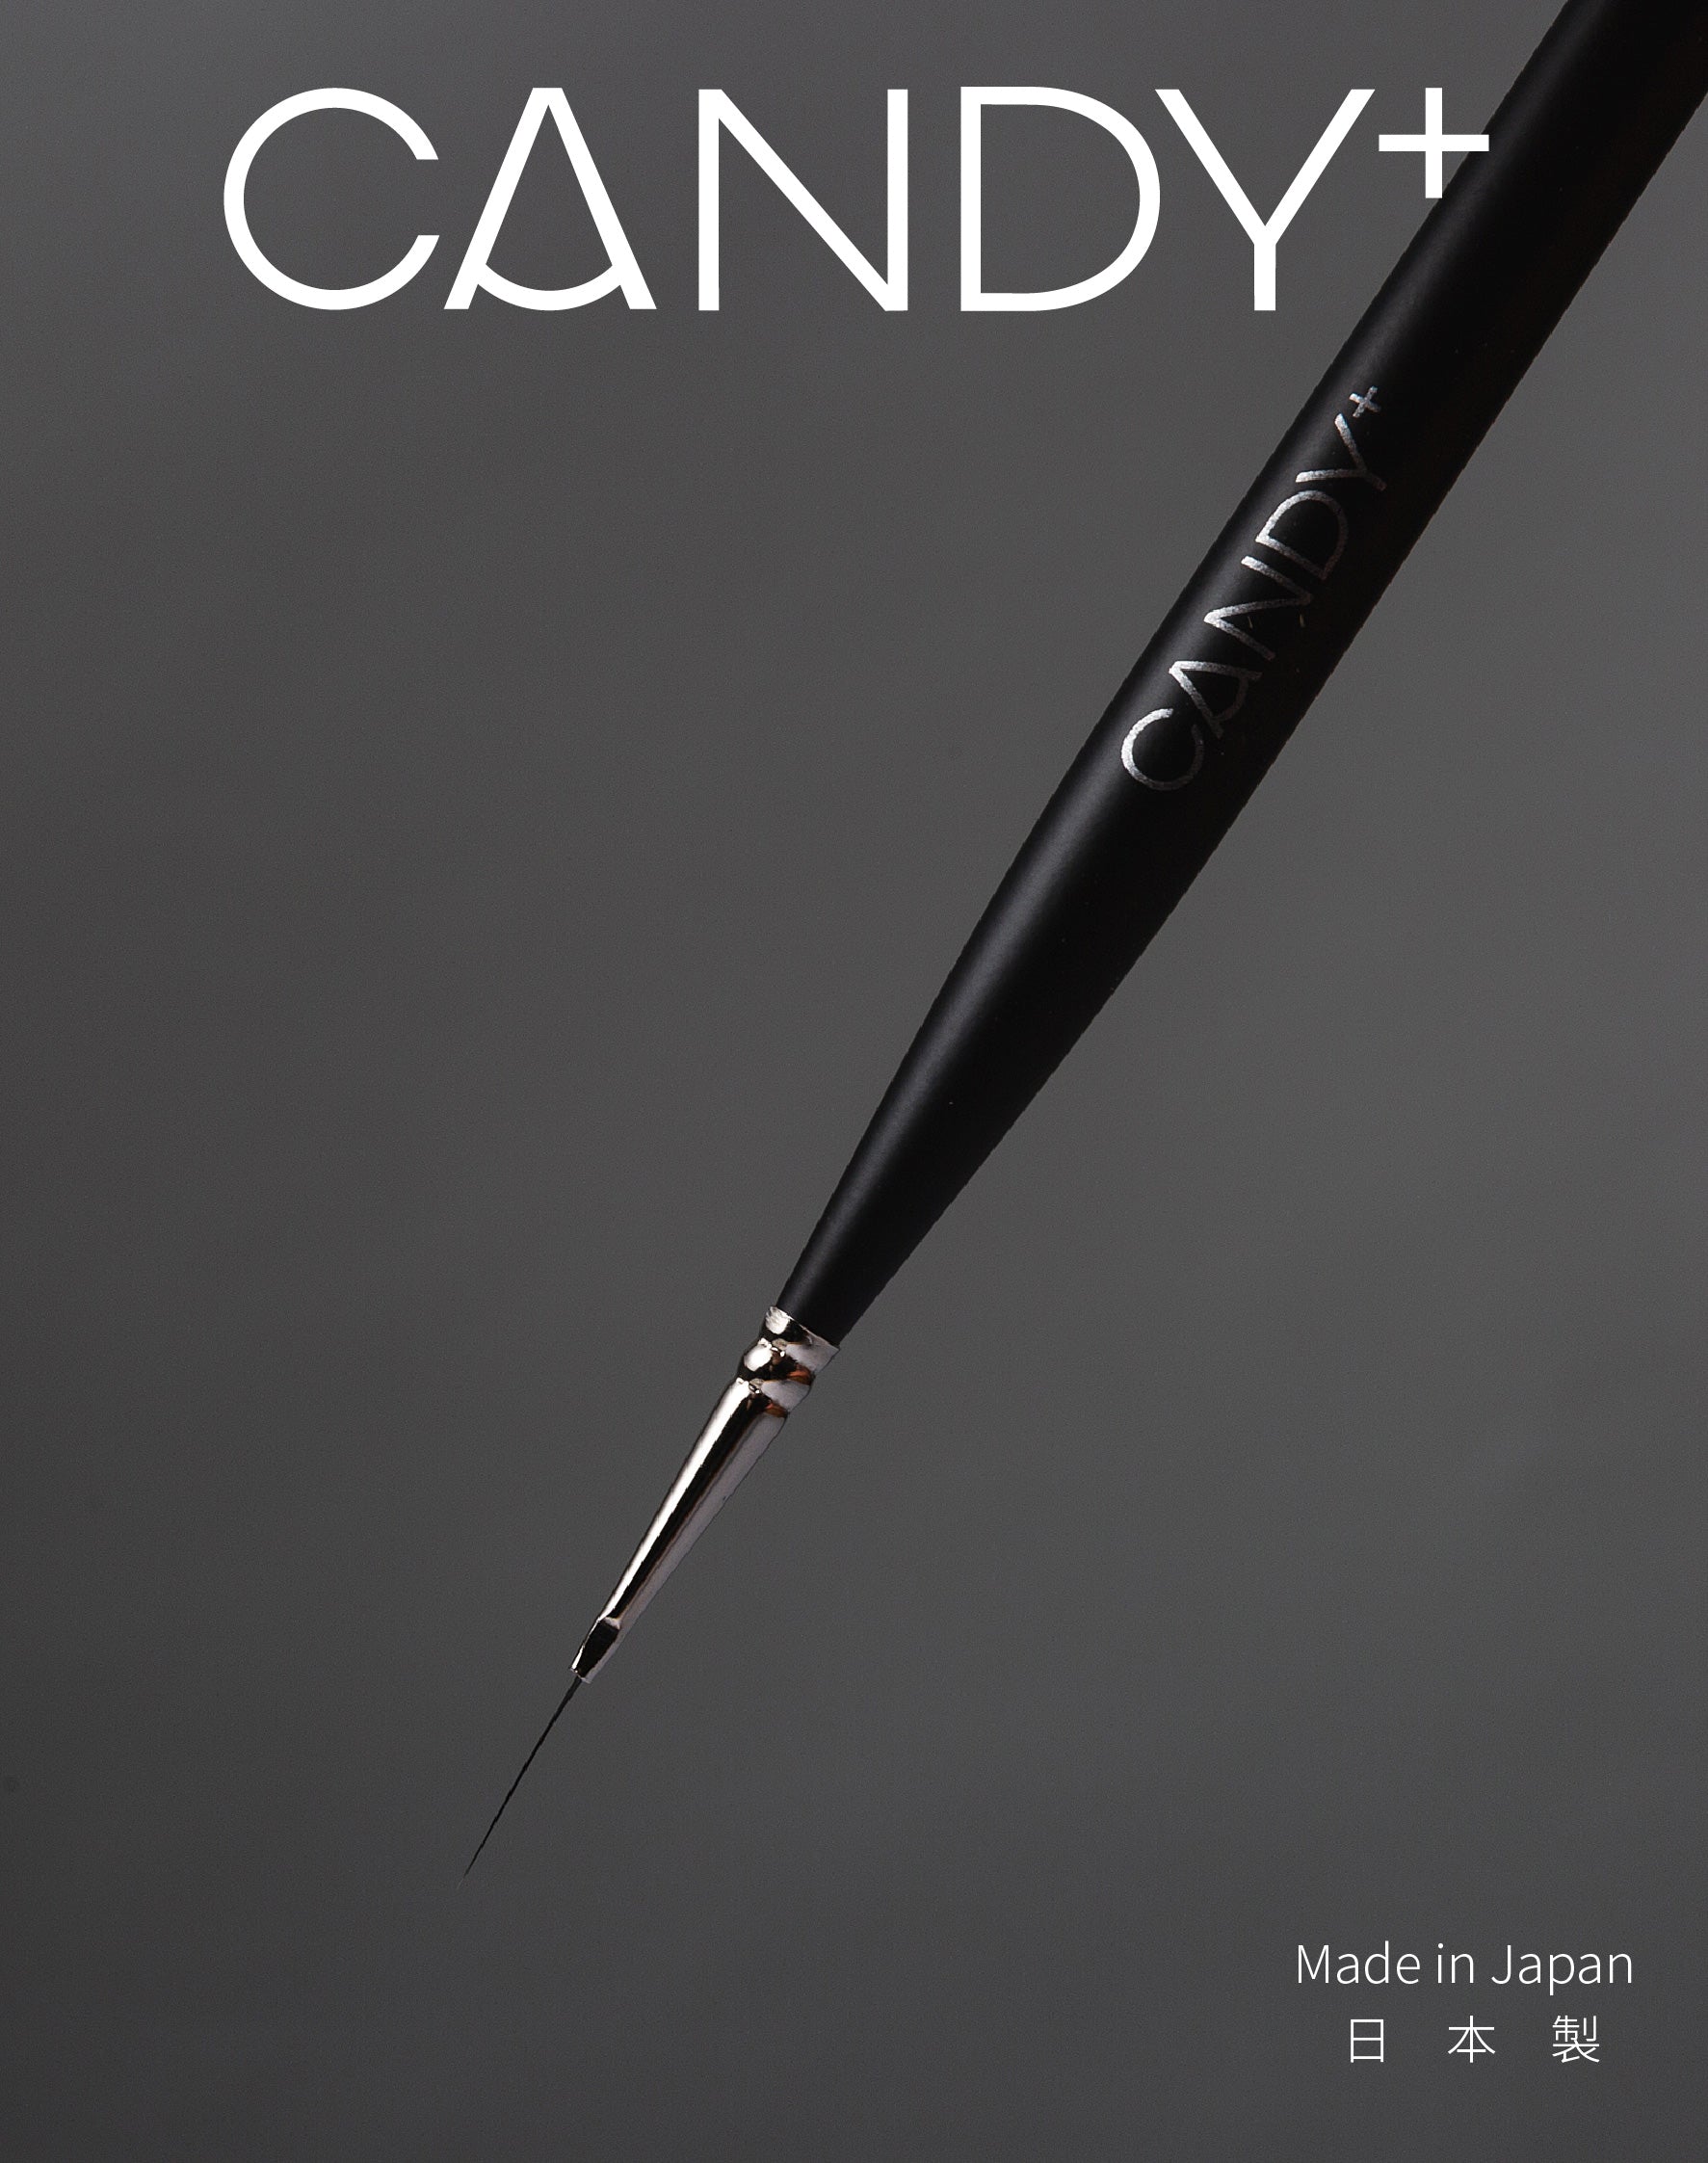 Candy+ Long Thine Liner Brush